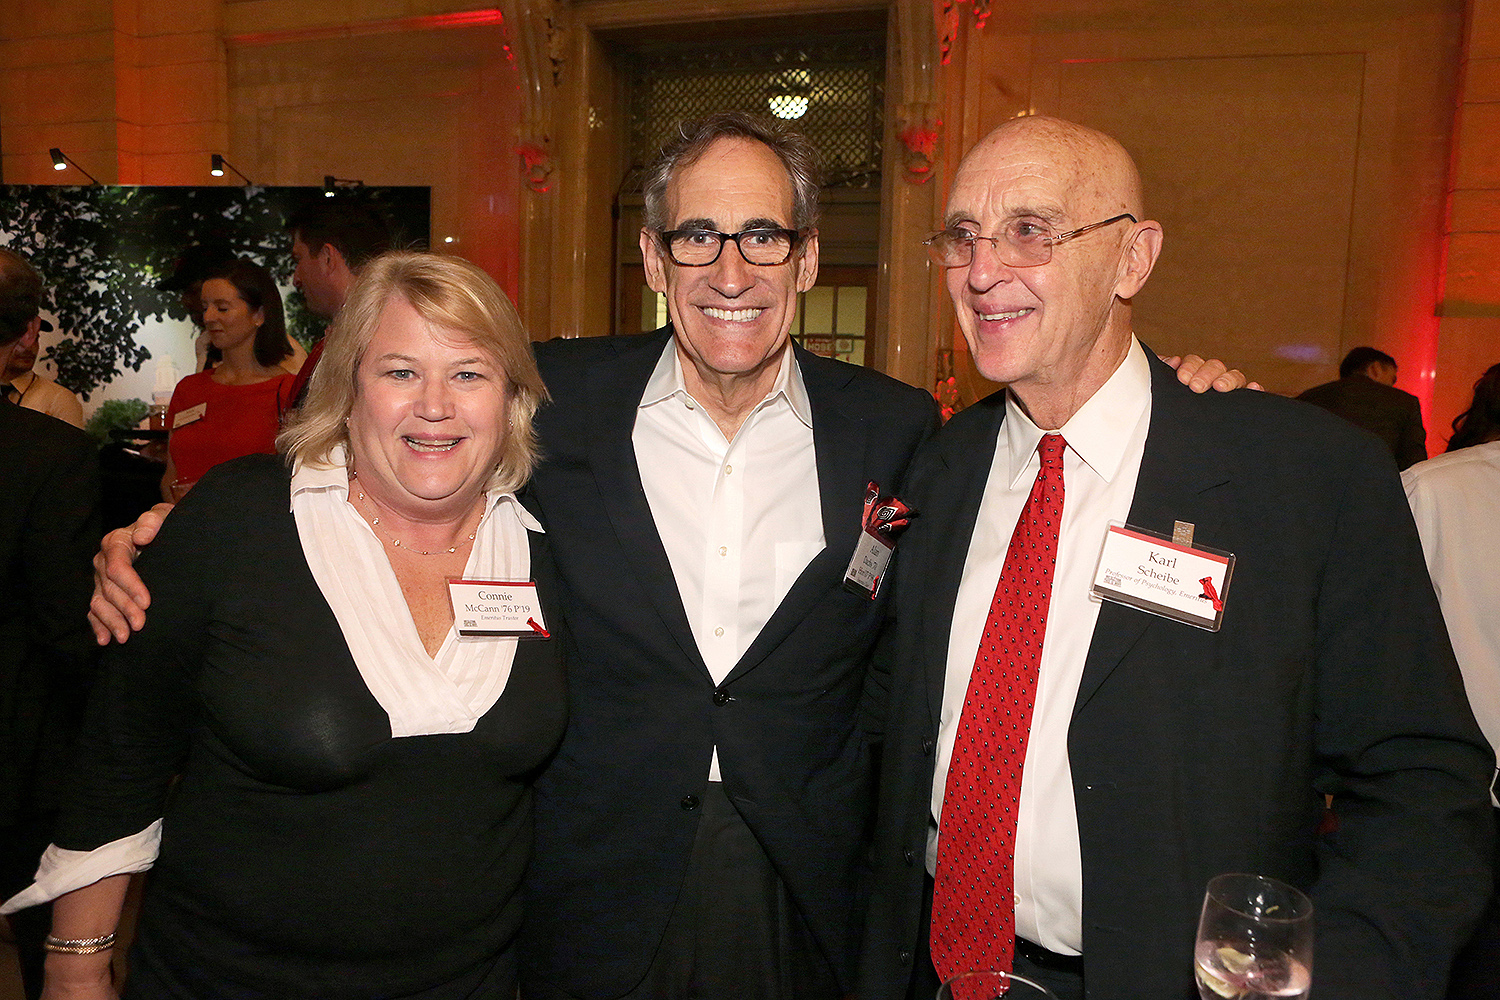 Wesleyan University and Campaign Chair John Usdan ’80 P’15, P’18, P’18, hosted a THIS IS WHY Campaign Celebration at Grand Central Station, New York, N.Y. on June 16, 2016. (Photo by Robert Adam Mayer)